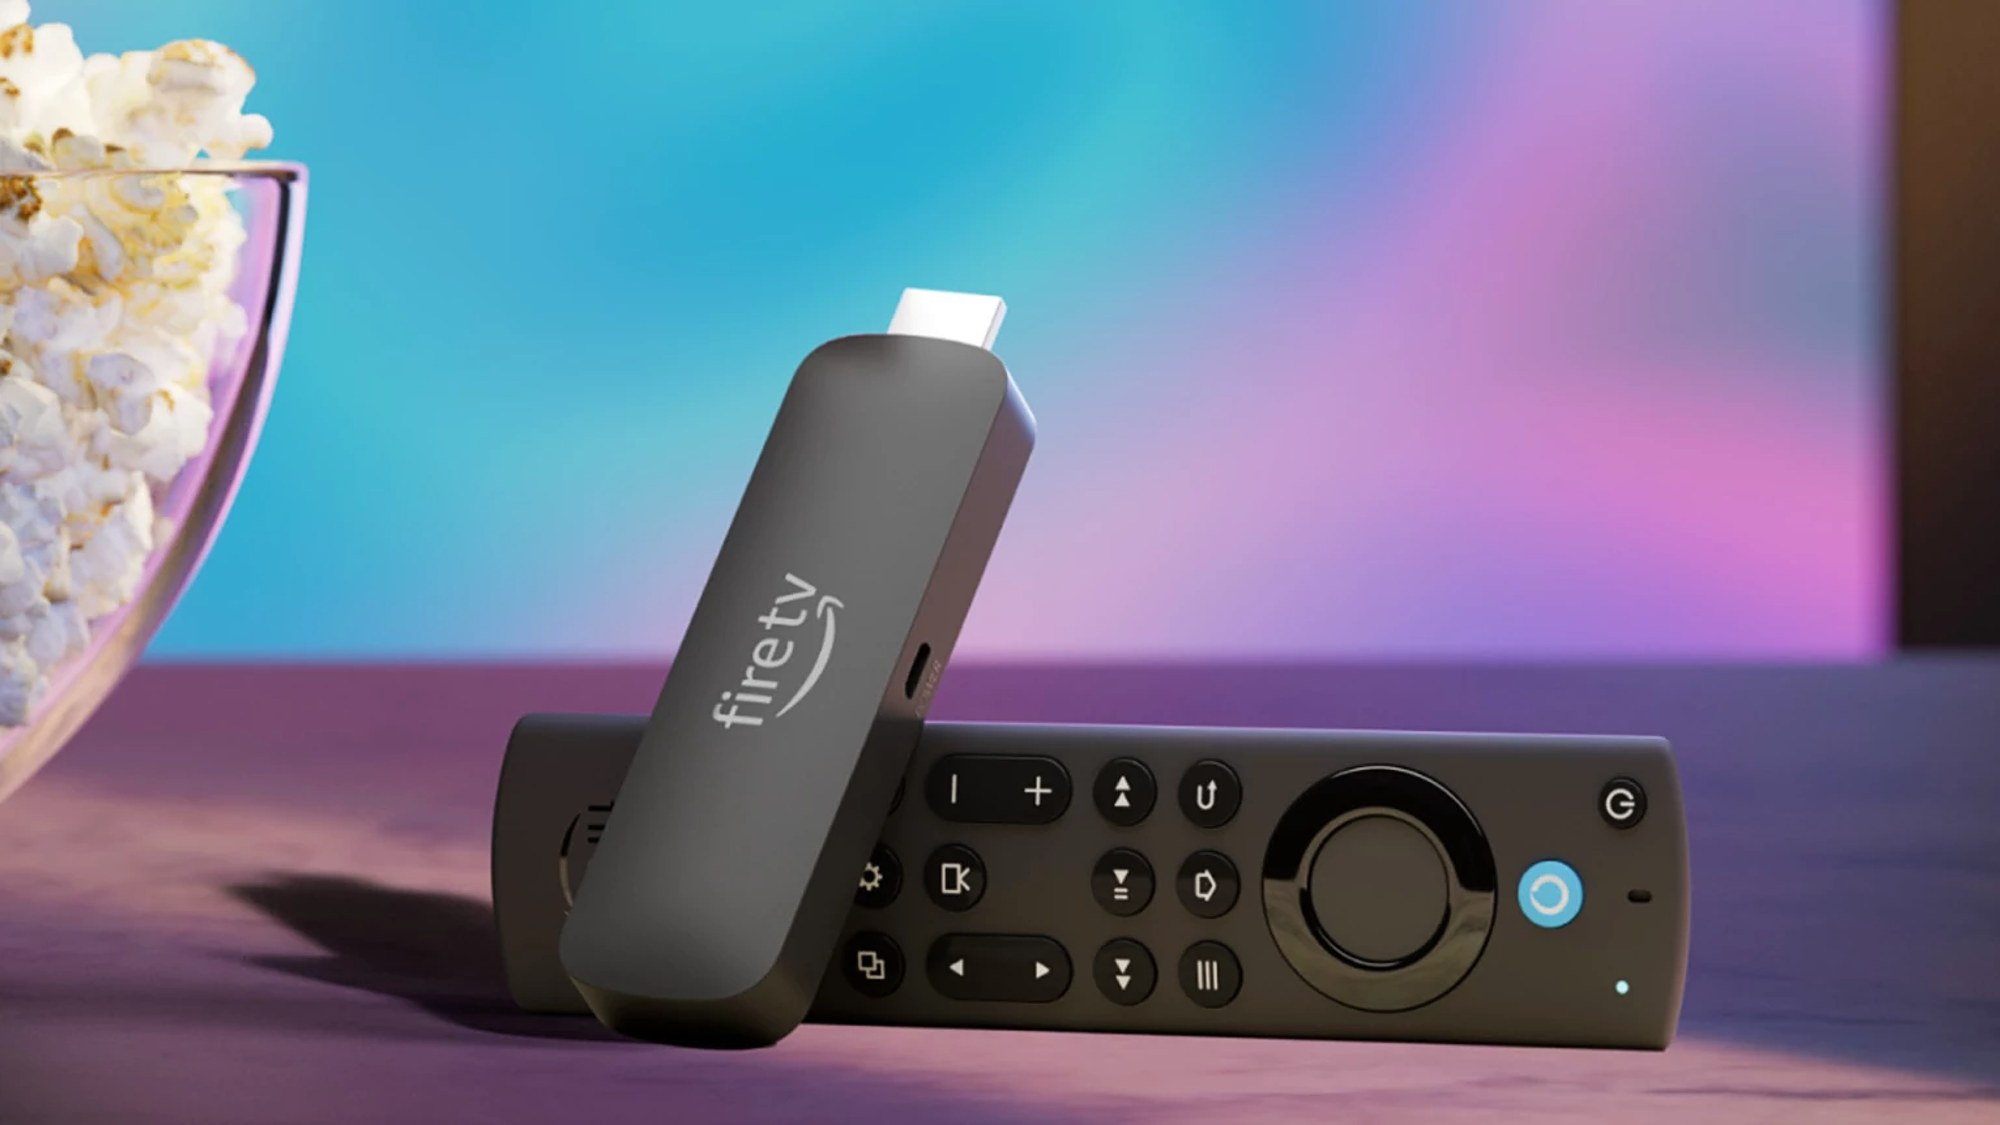 Amazon adds big upgrades to new Fire TV Stick 4K and 4K Max Toms Guide